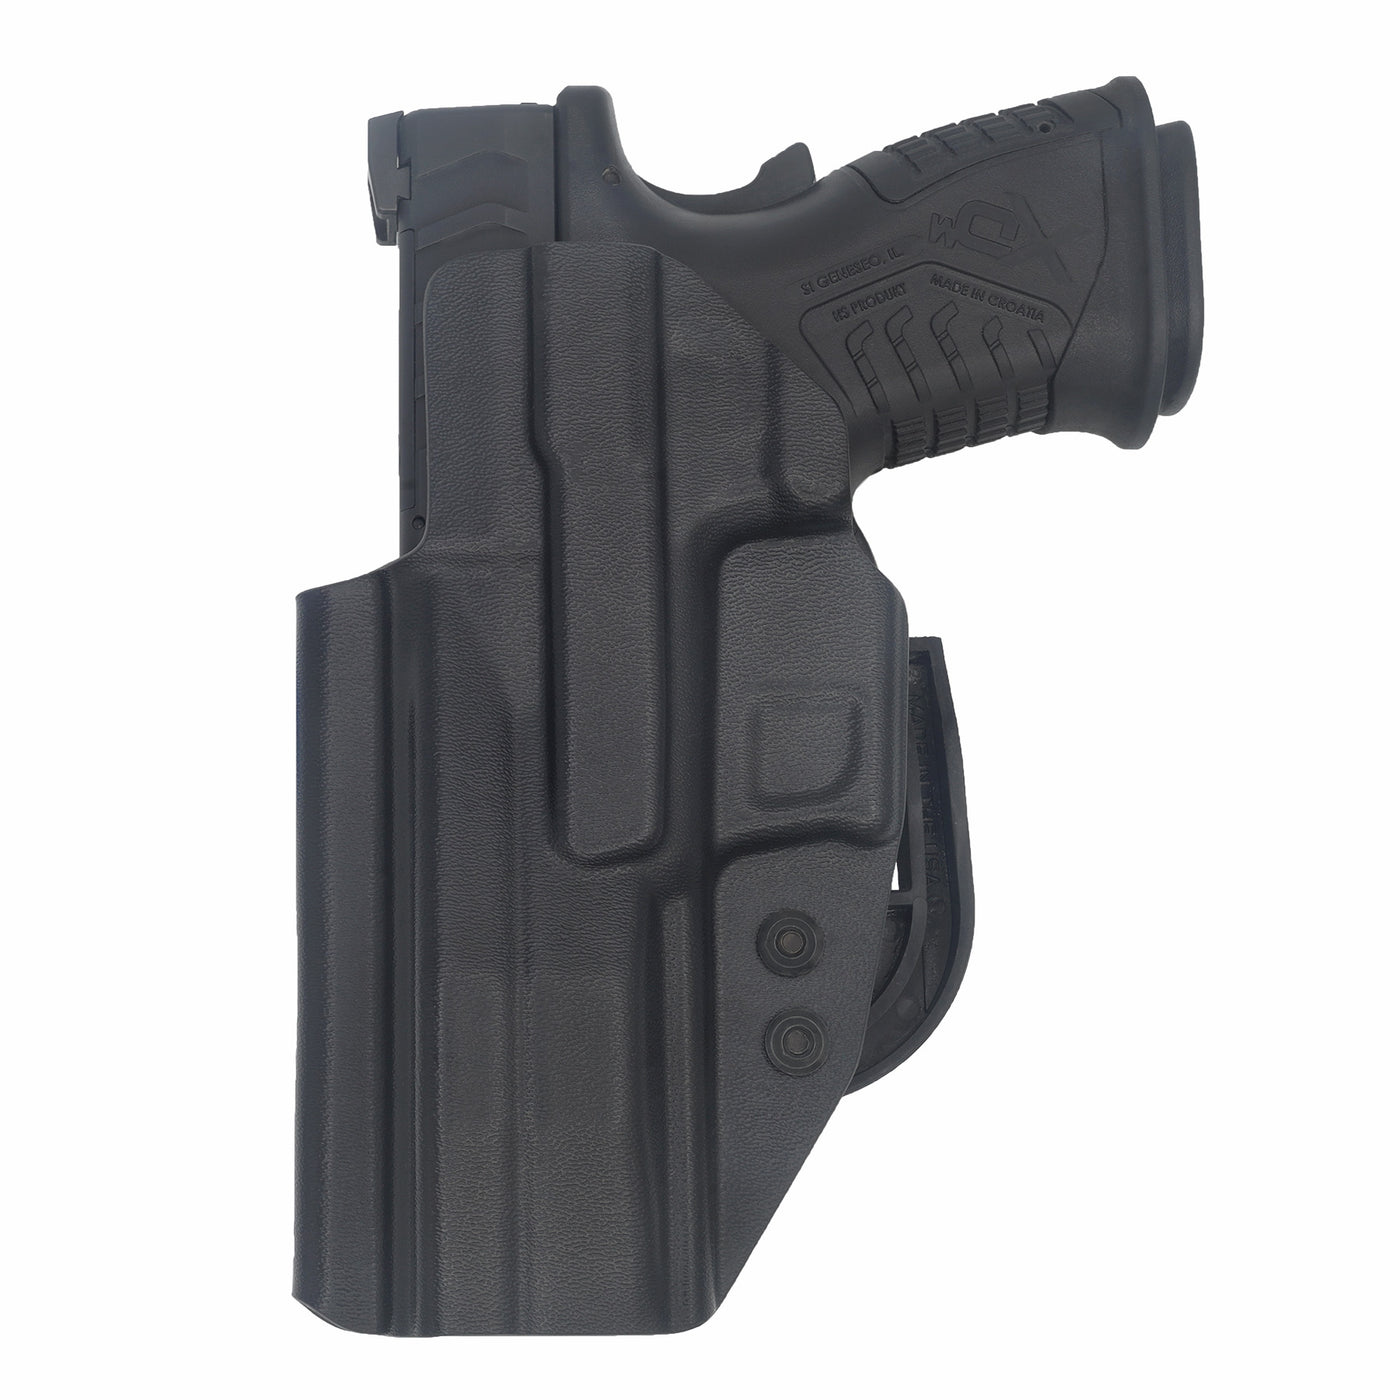 C&G Holsters Custom IWB covert ALPHA UPGRADE Springfield XDM Elite 4.5" in holstered position back view